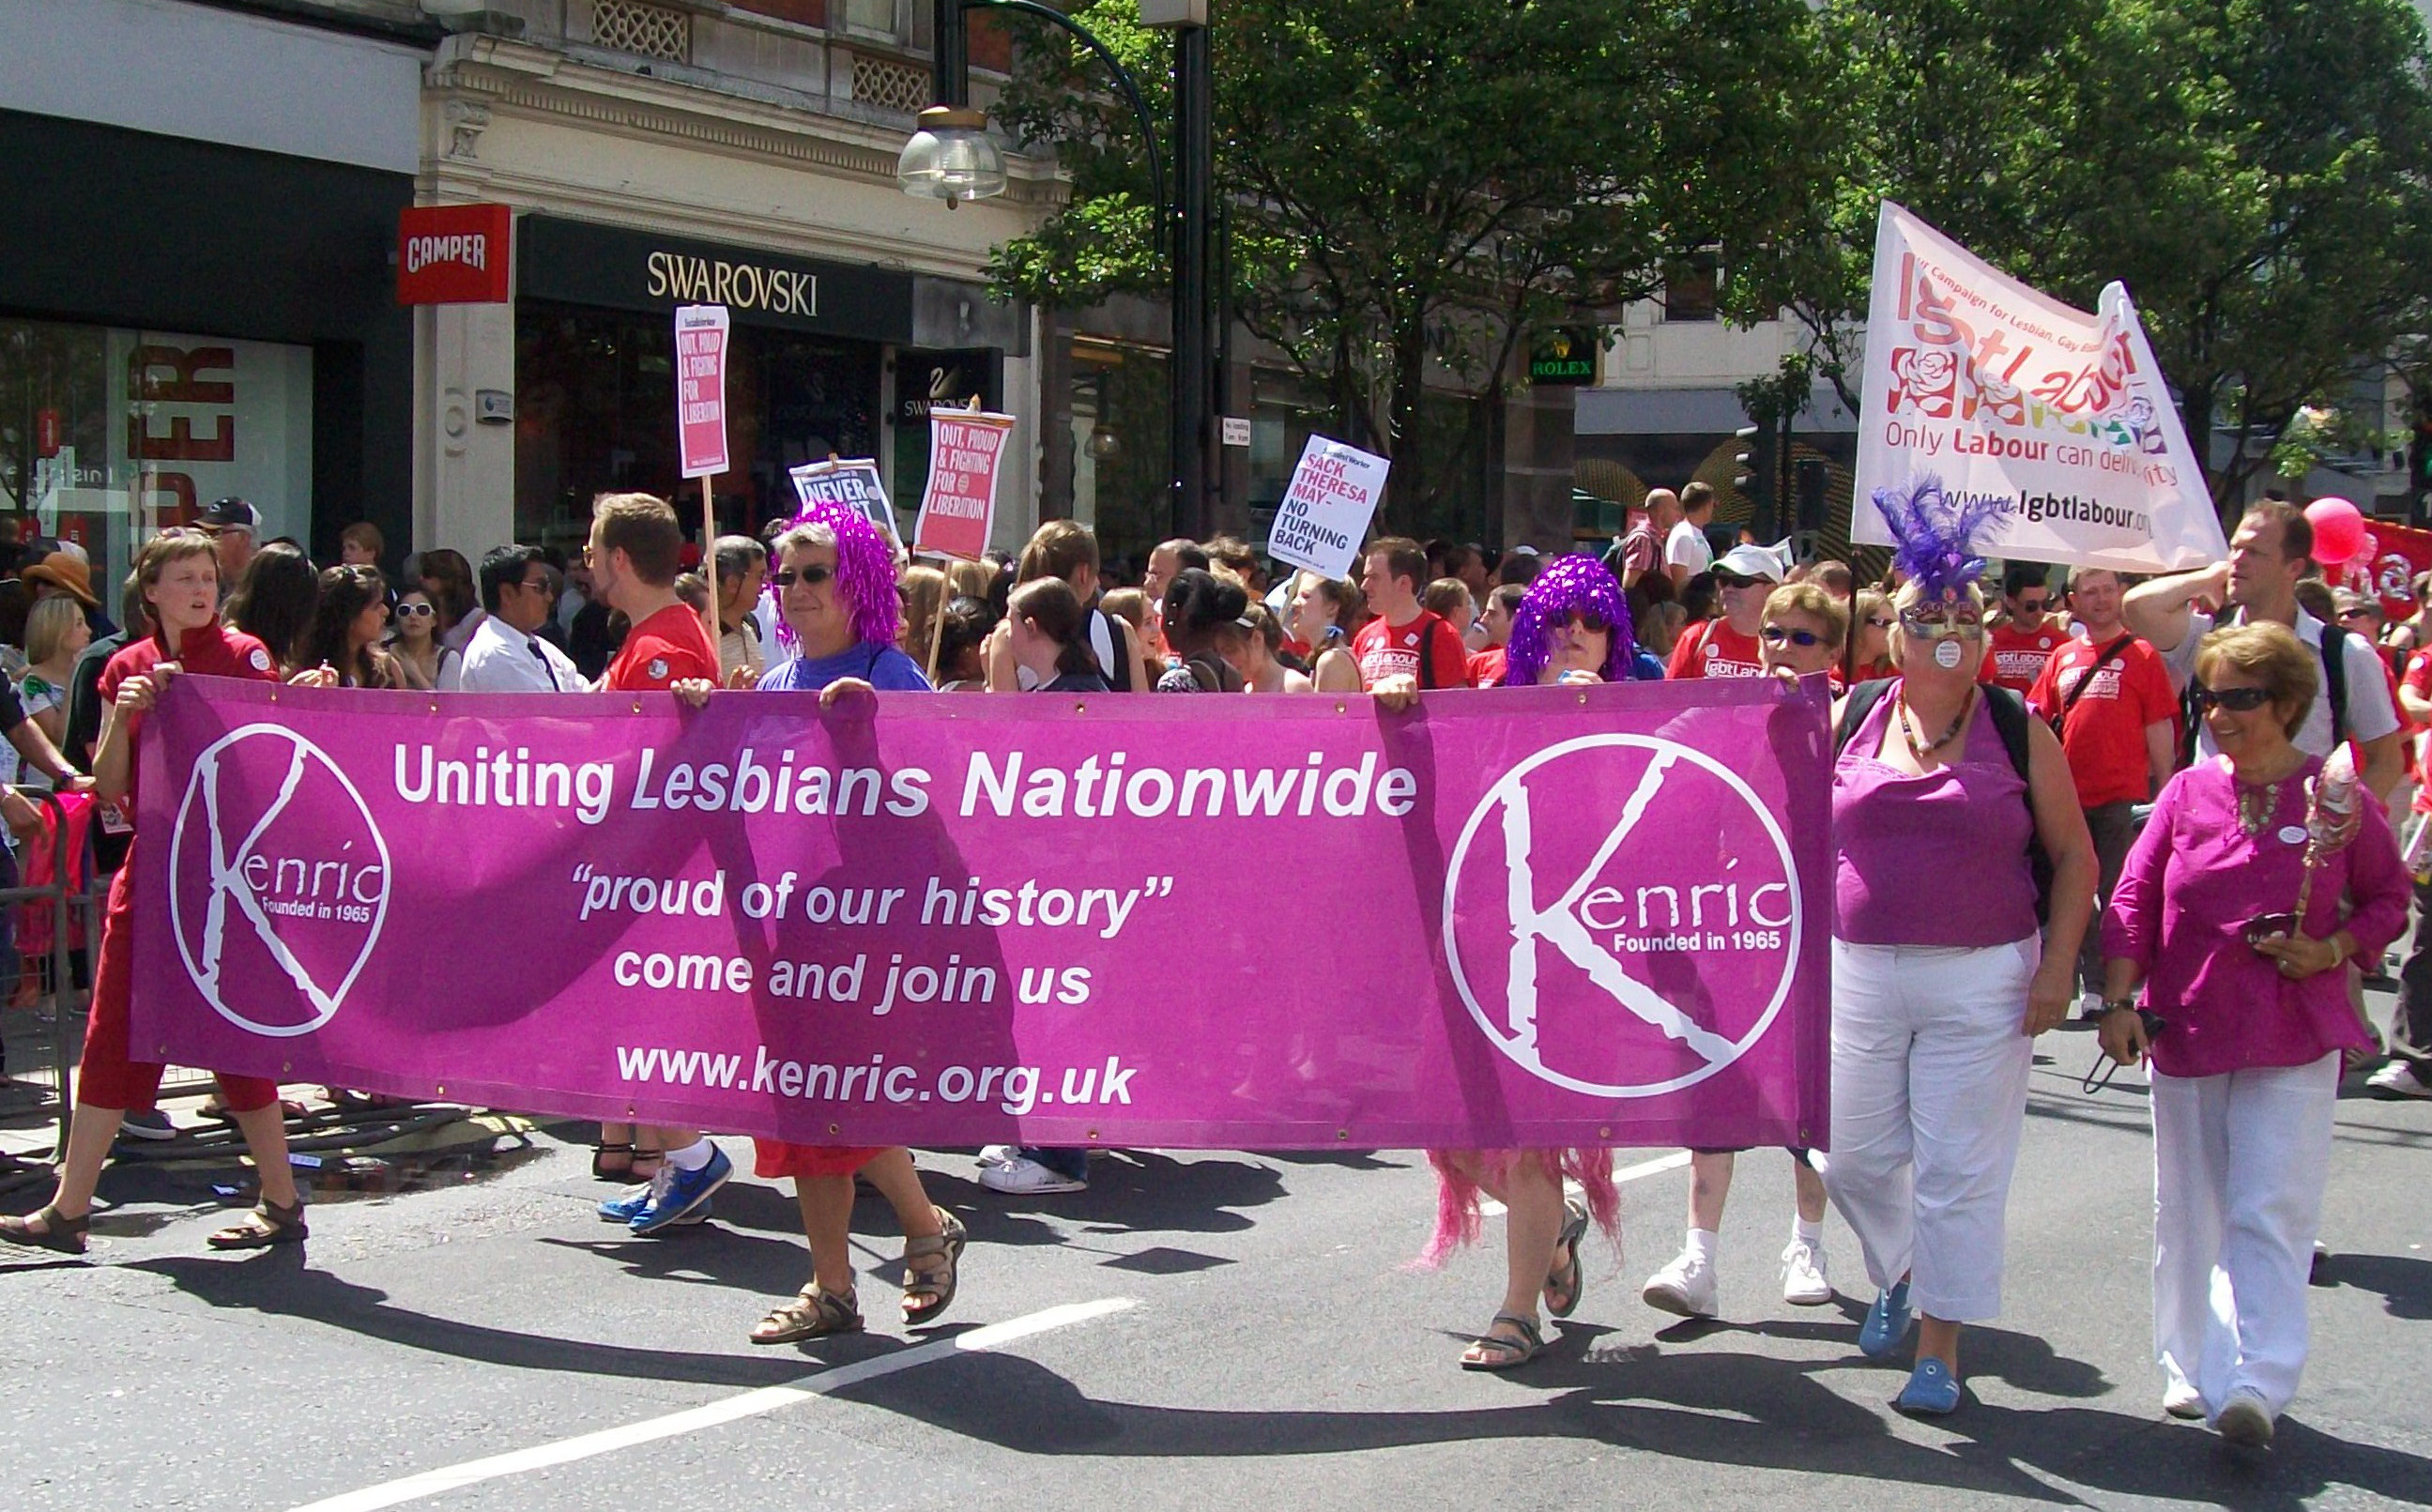 Marchers carrying Kenric banner with wording: 
Uniting Lesbians Nationwide
"proud of our history"
come and join us
www.kenric.org.uk